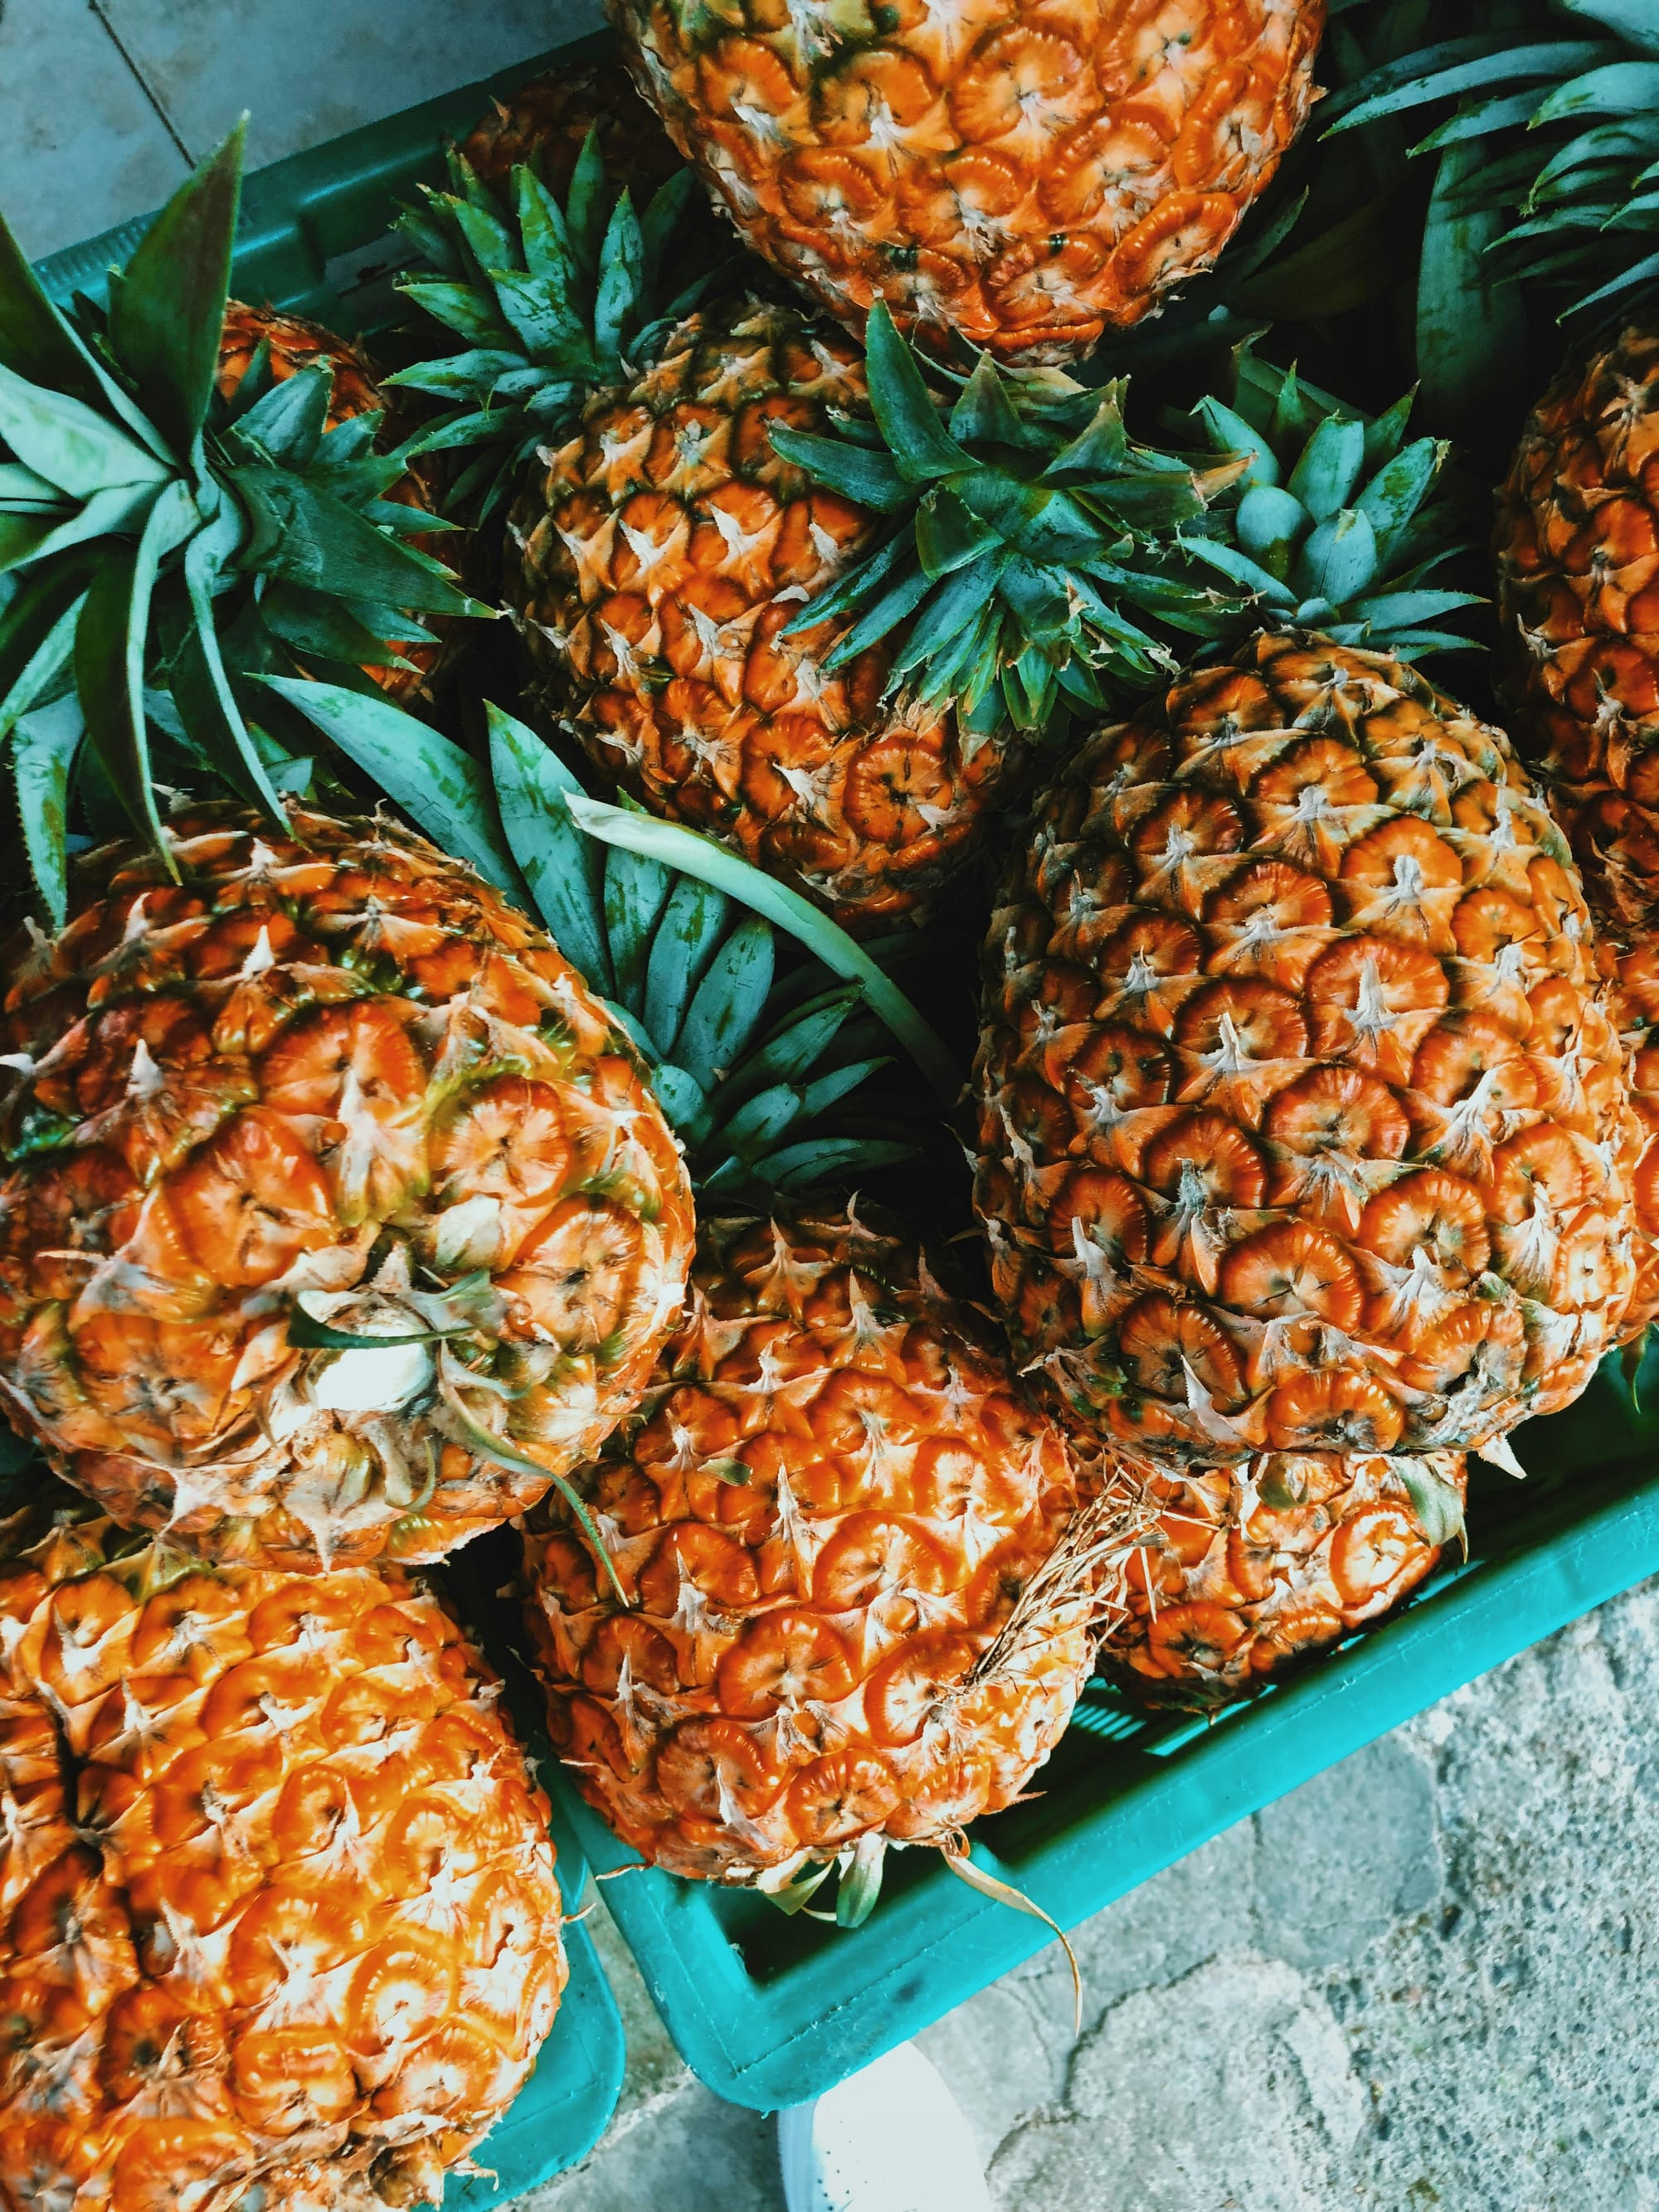 Overhead shot of pineapples in a turquoise box on a road in Mexico ready to be made into tepache